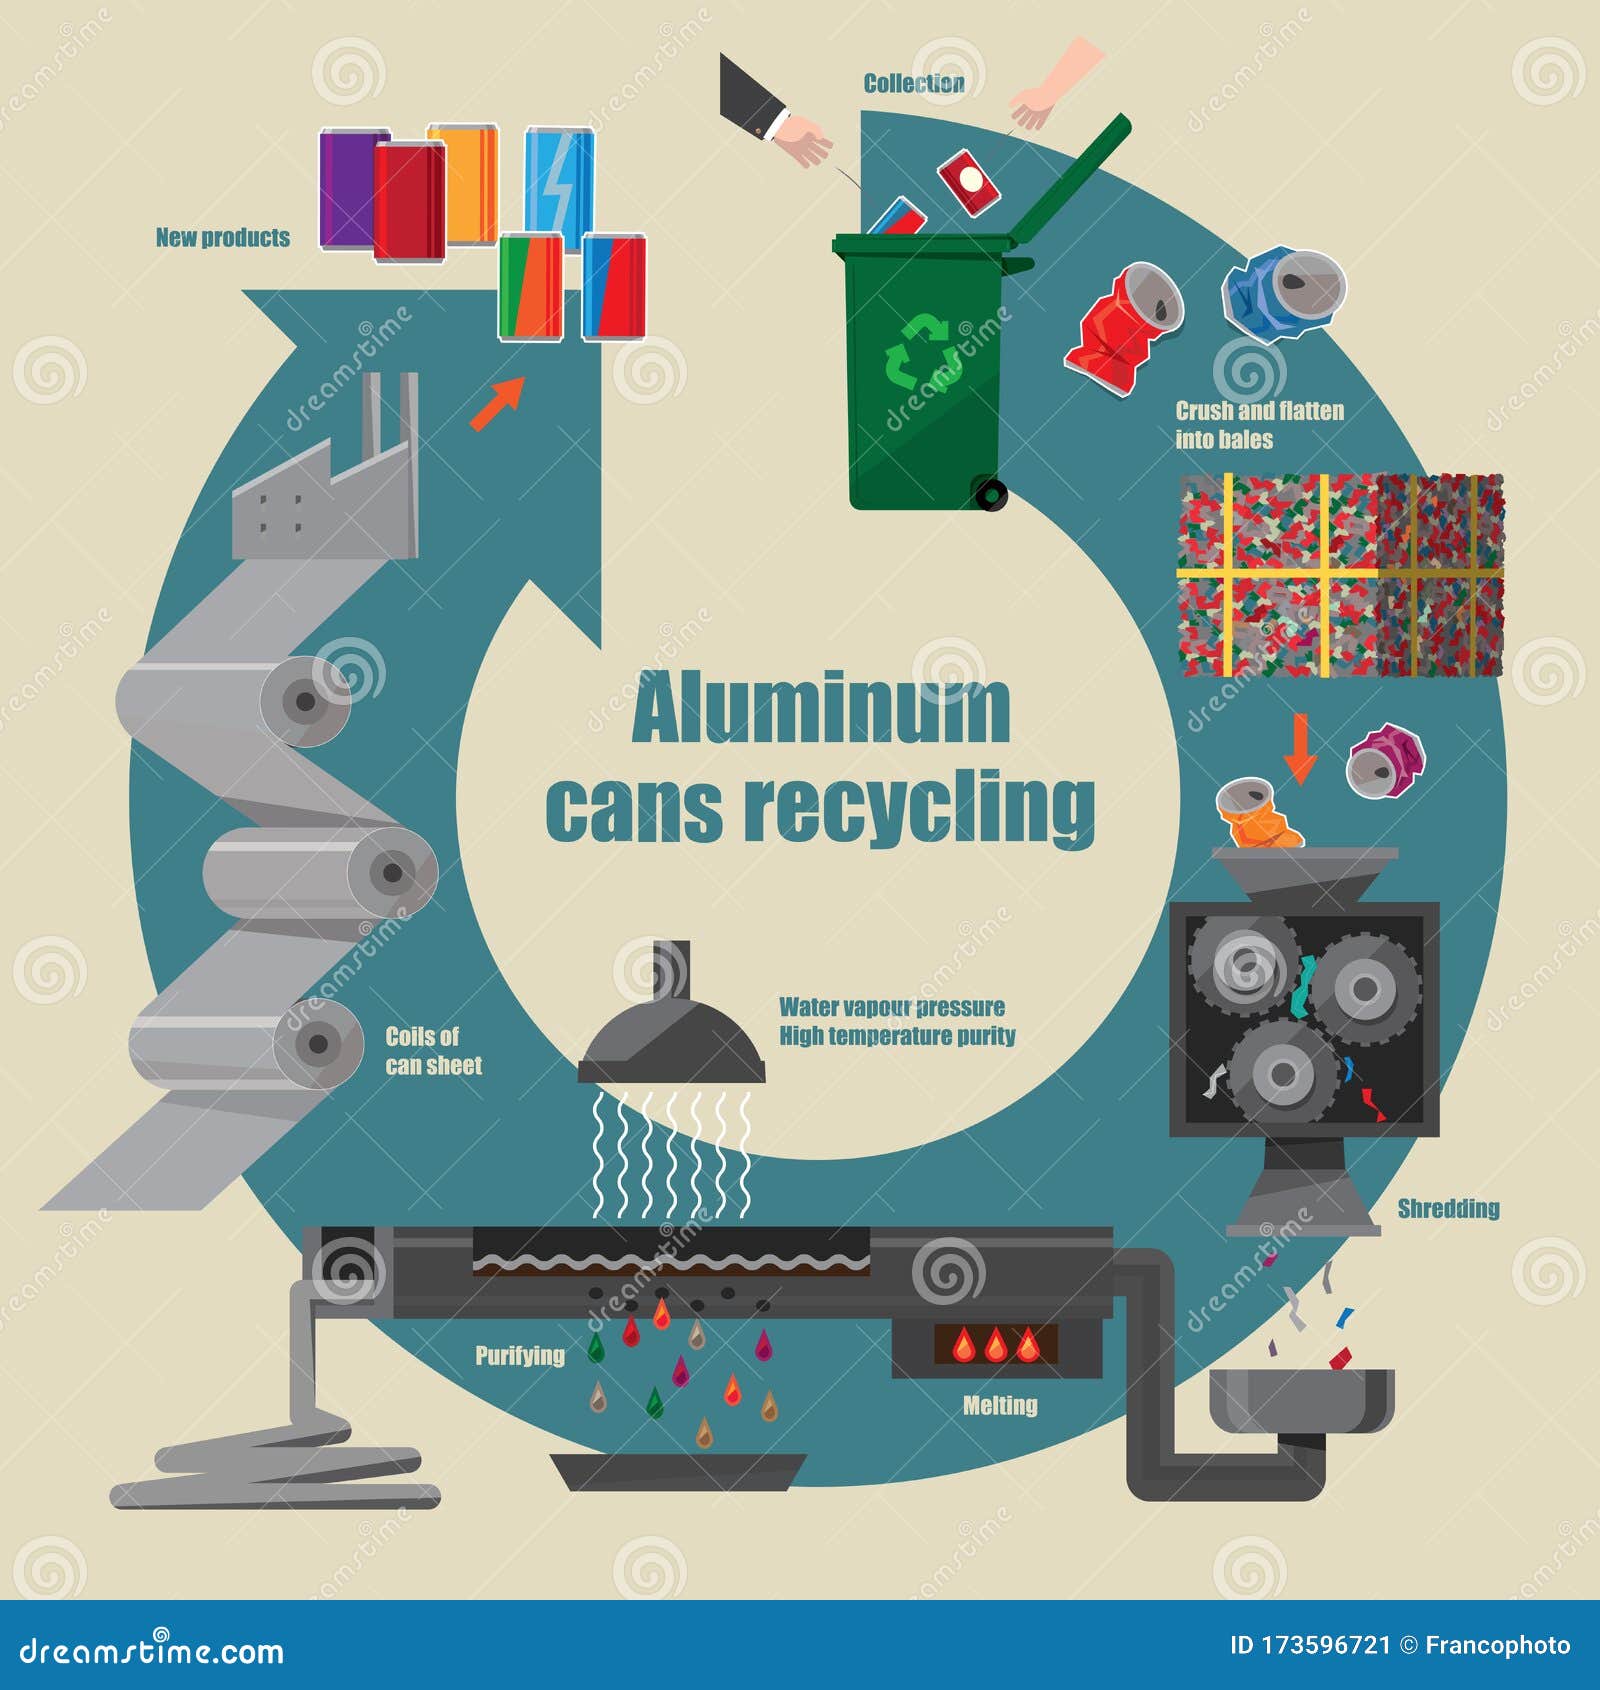 The Cans Recycling Process Flowchart